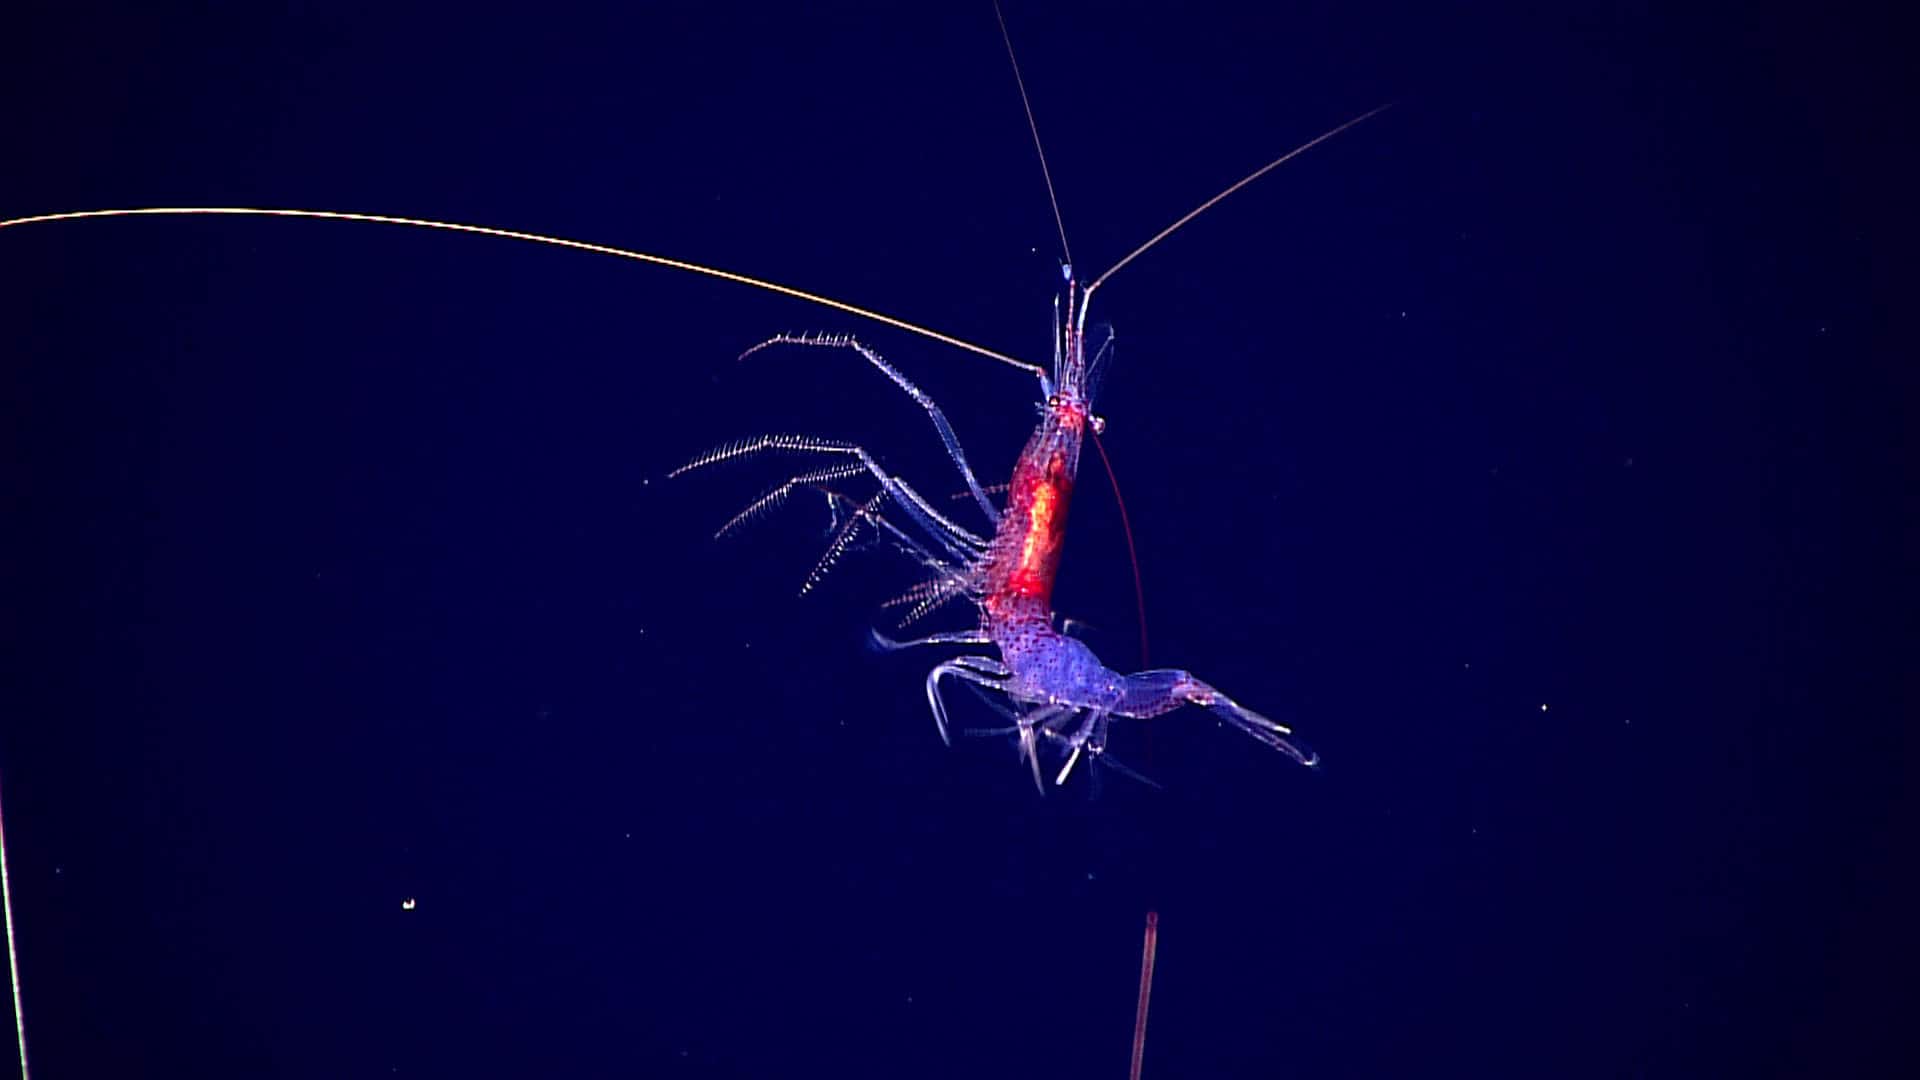 deep sea shrimp swimming. It is glowing red